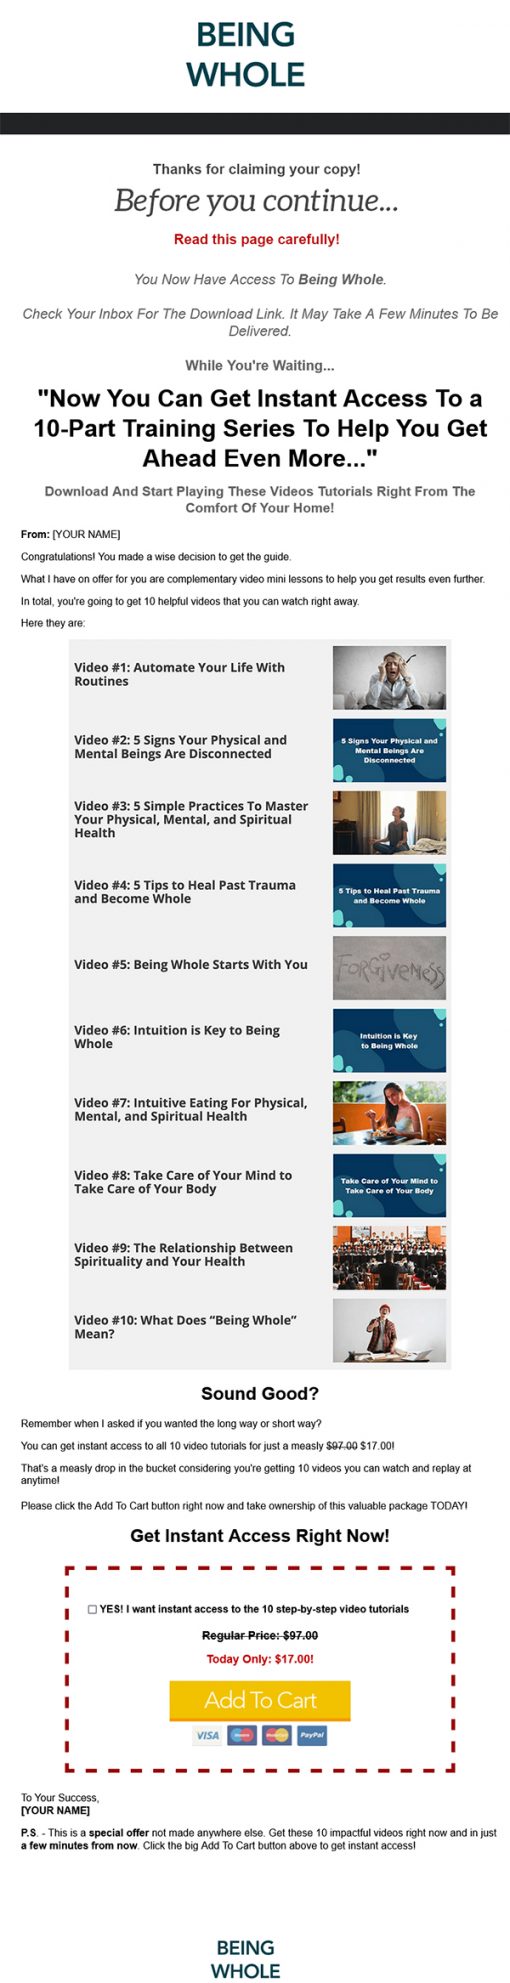 Being Whole Spiritual Health Ebook and Videos MRR